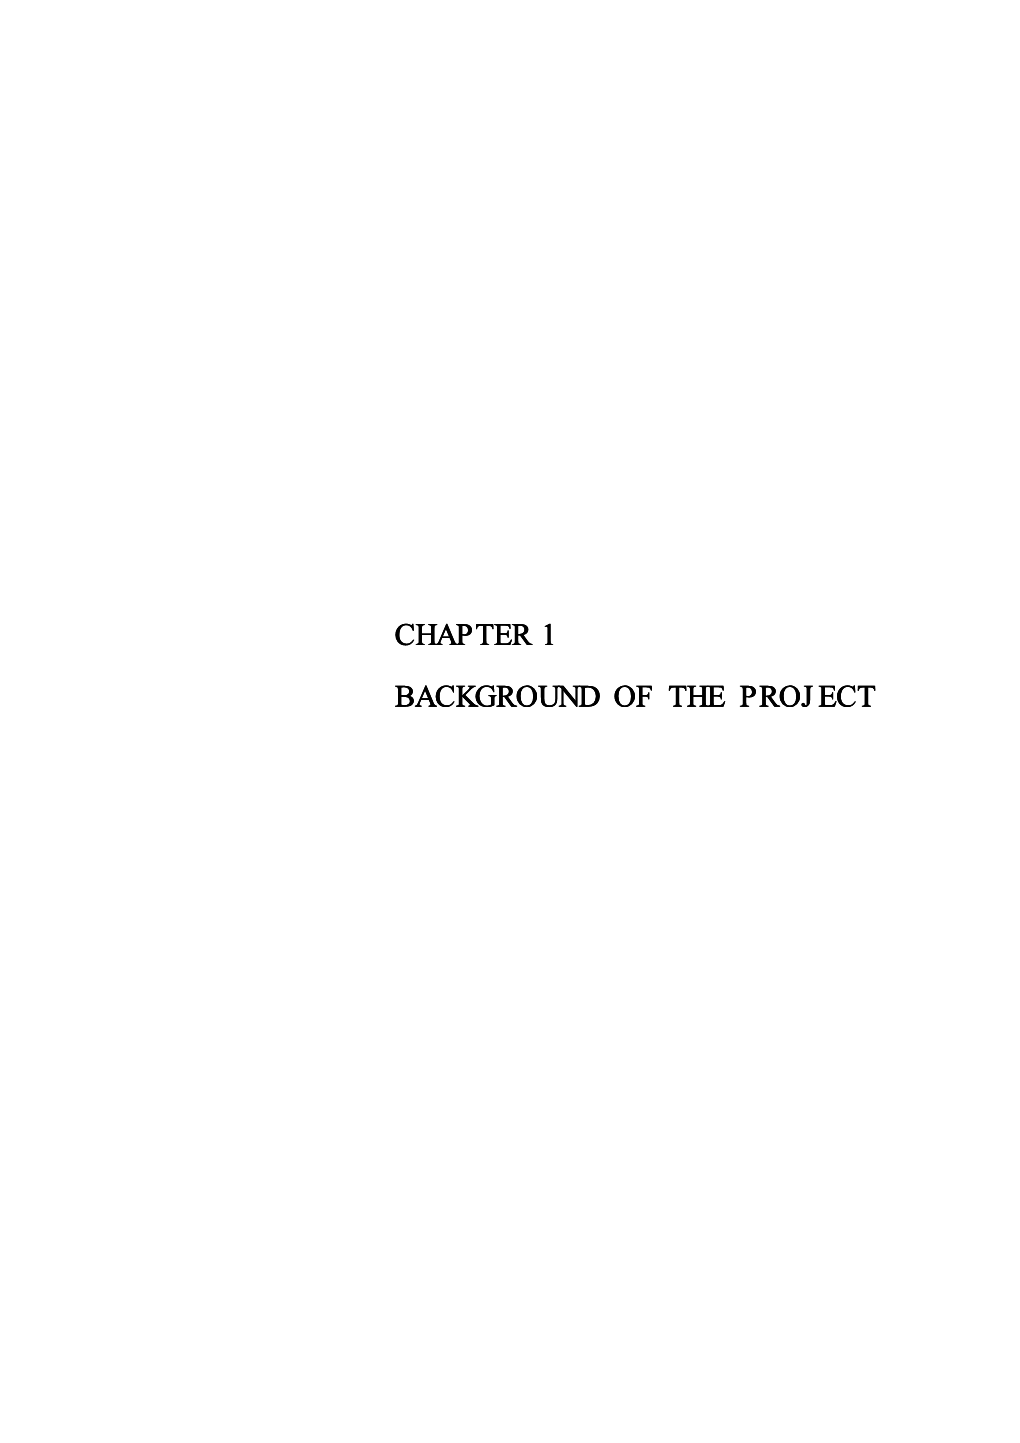 Chapter 1 Background of the Project